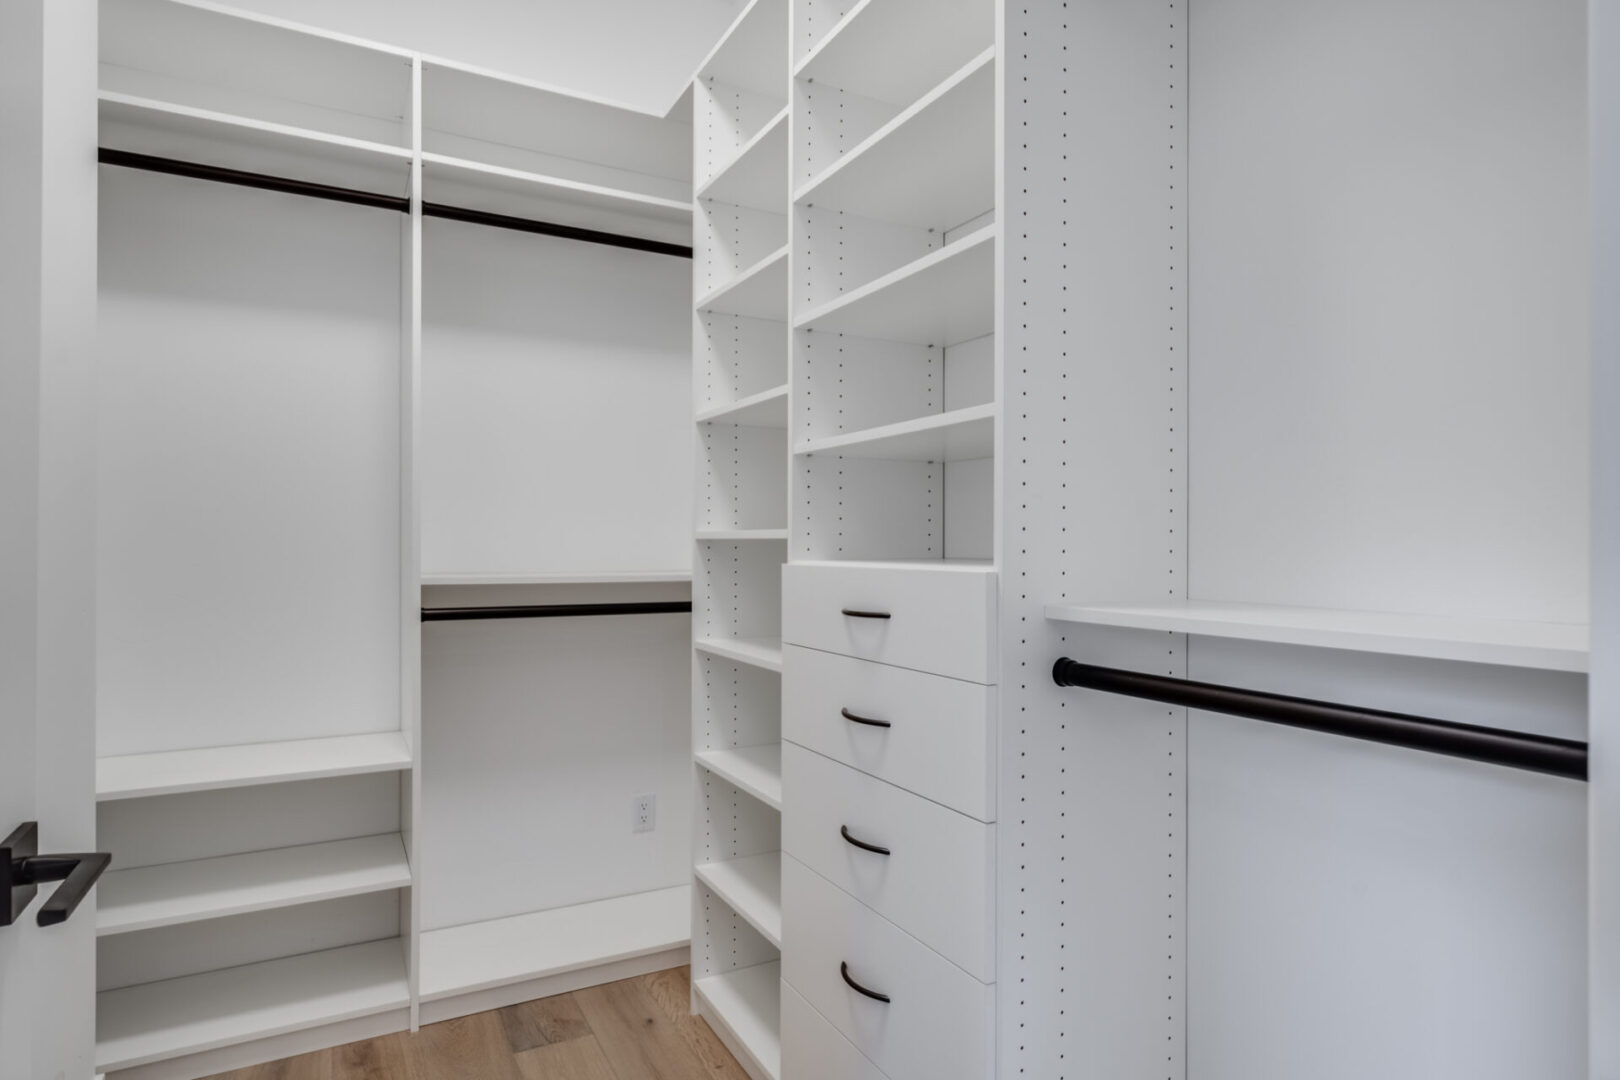 A white closet with shelves and drawers in it